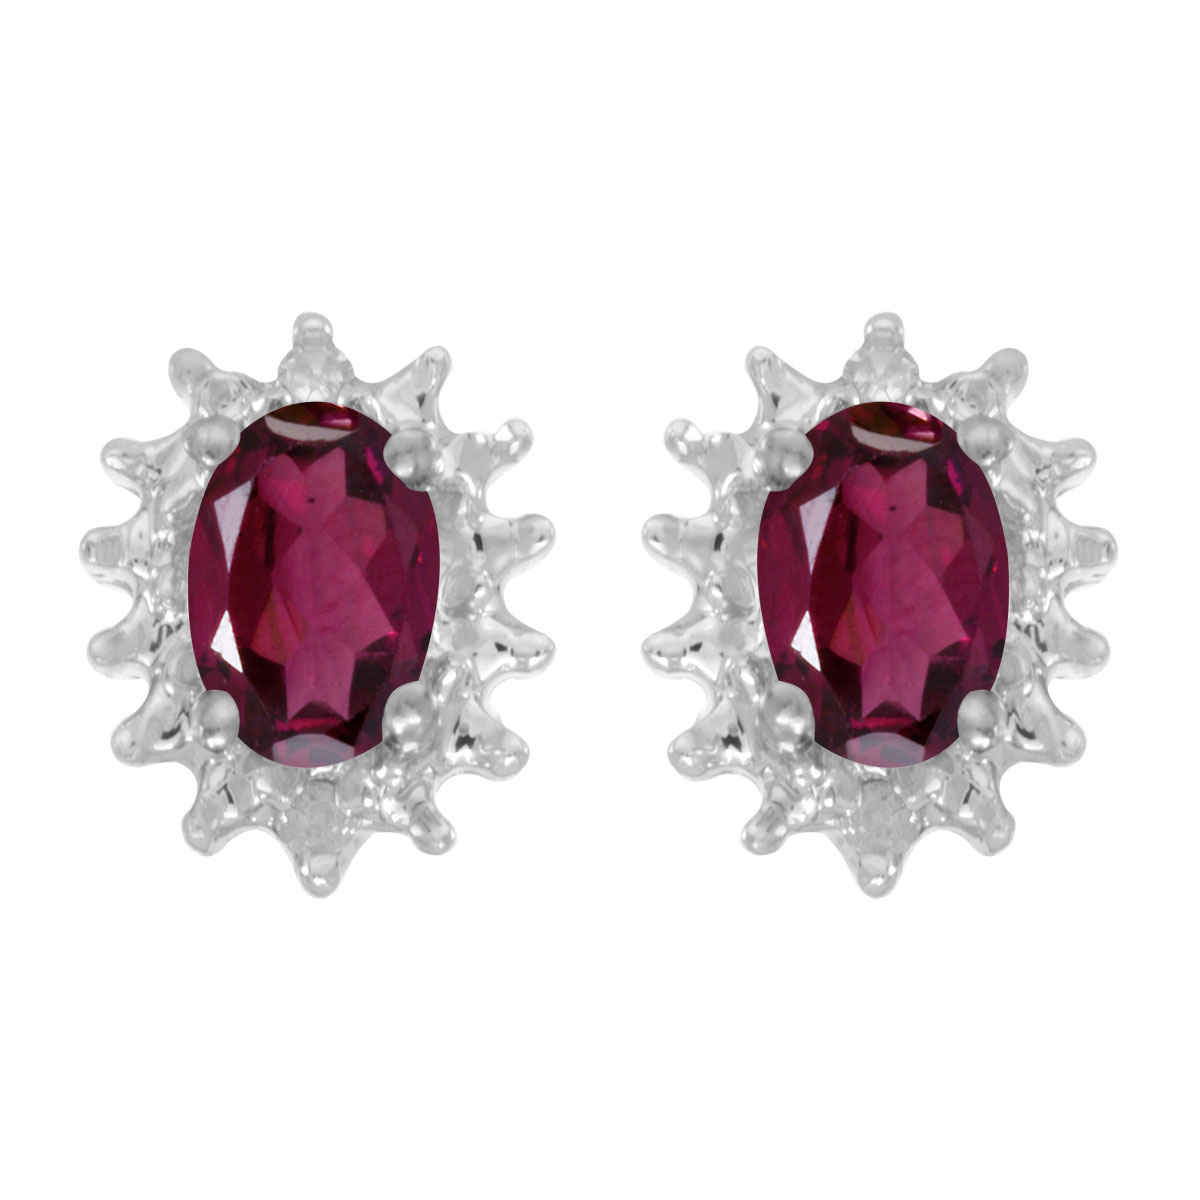 JCX2014: These 14k white gold oval rhodolite garnet and diamond earrings feature 6x4 mm genuine natural rhodolite garnets with a 0.98 ct total weight and .04 ct diamonds.